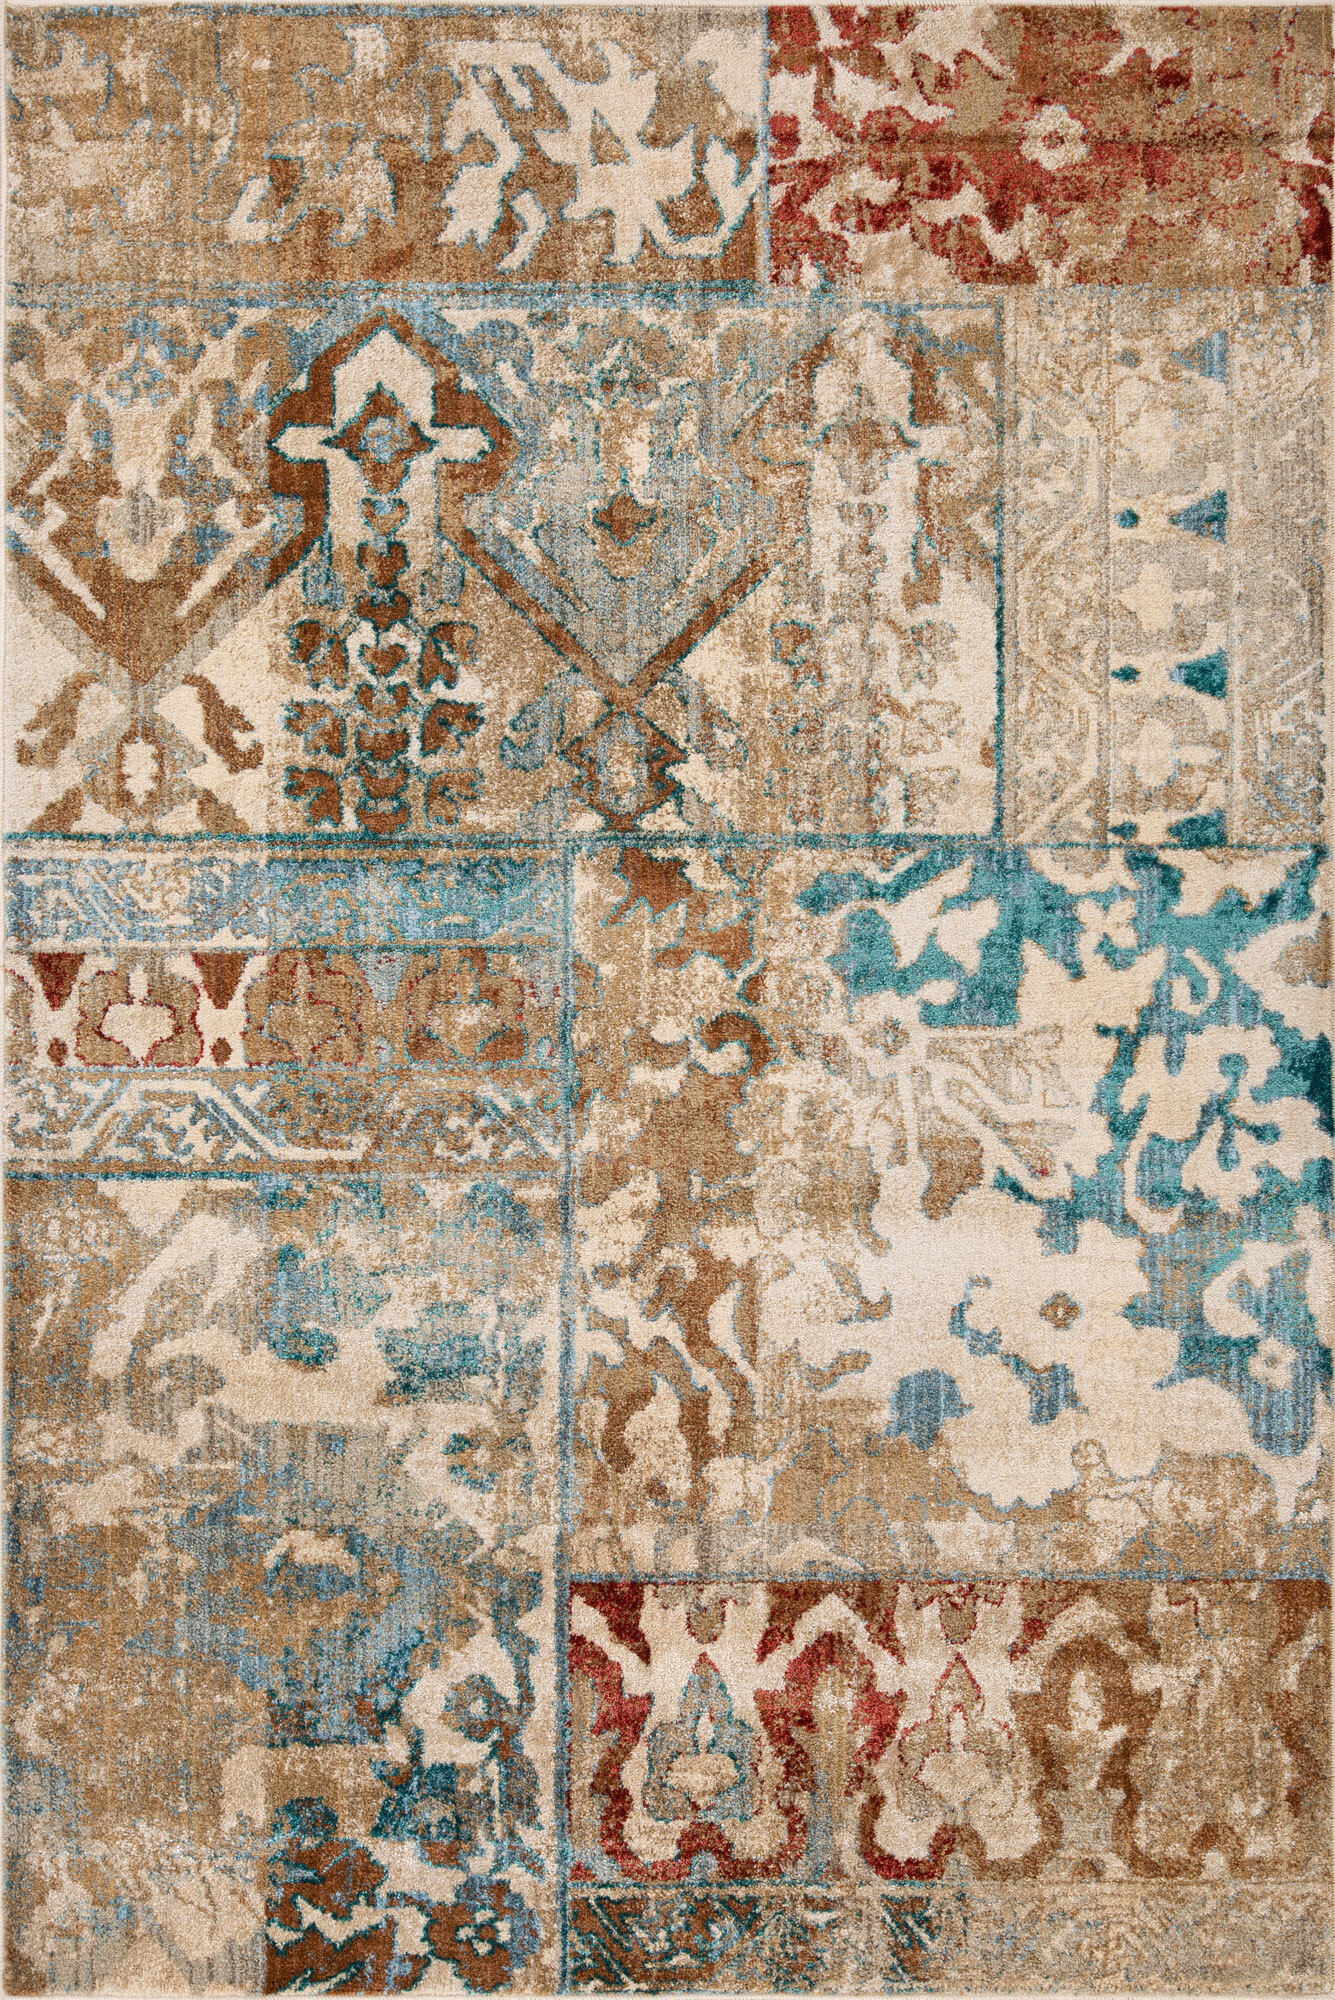 Odin Transitional Abstract Rug